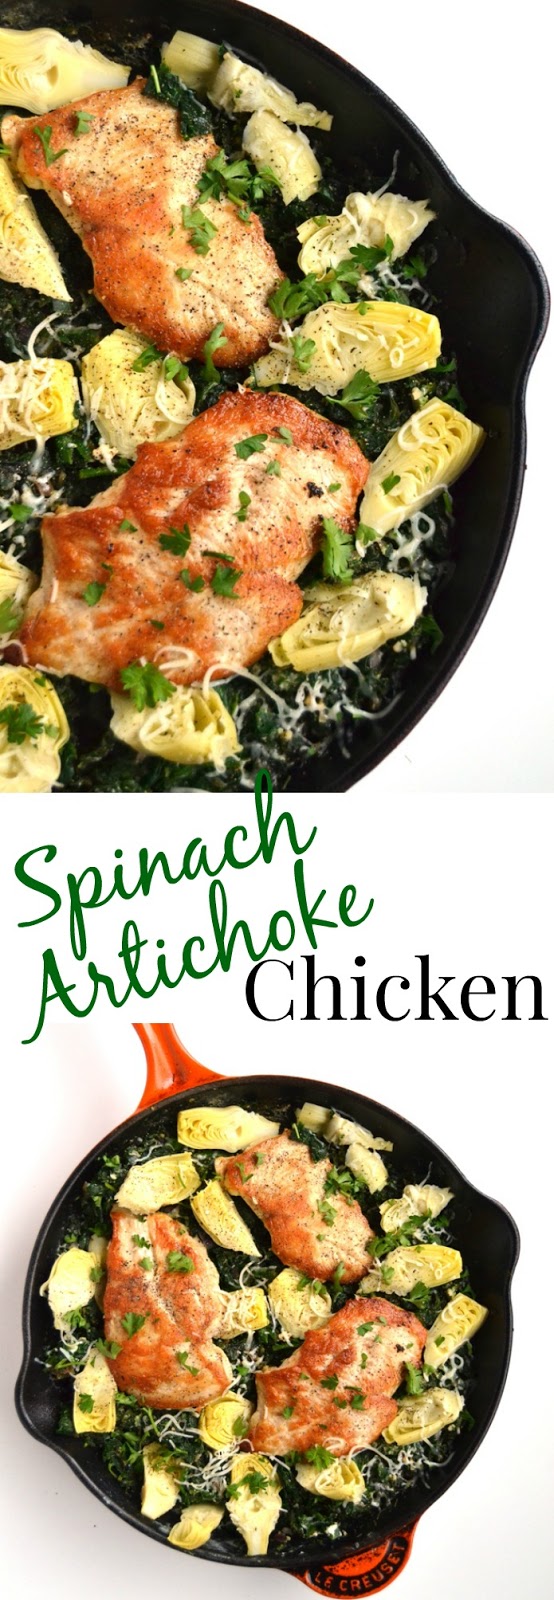 Spinach Artichoke Chicken is a lighter version of your favorite spinach artichoke dip made with Greek yogurt for an impressive and easy dinner! www.nutritionistreviews.com